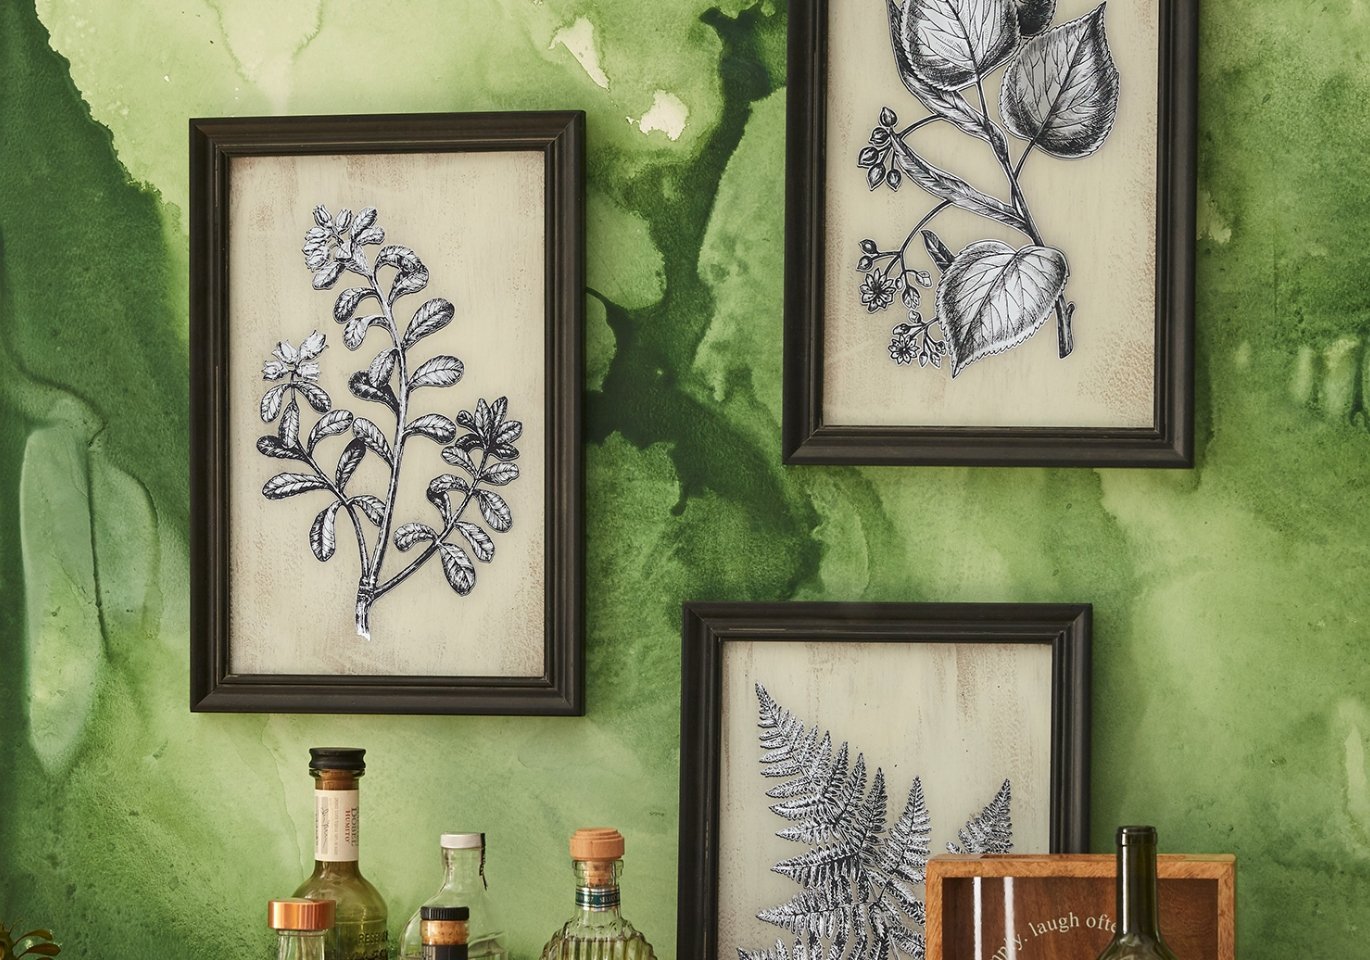 How to Decorate With Wall Art - Pier 1